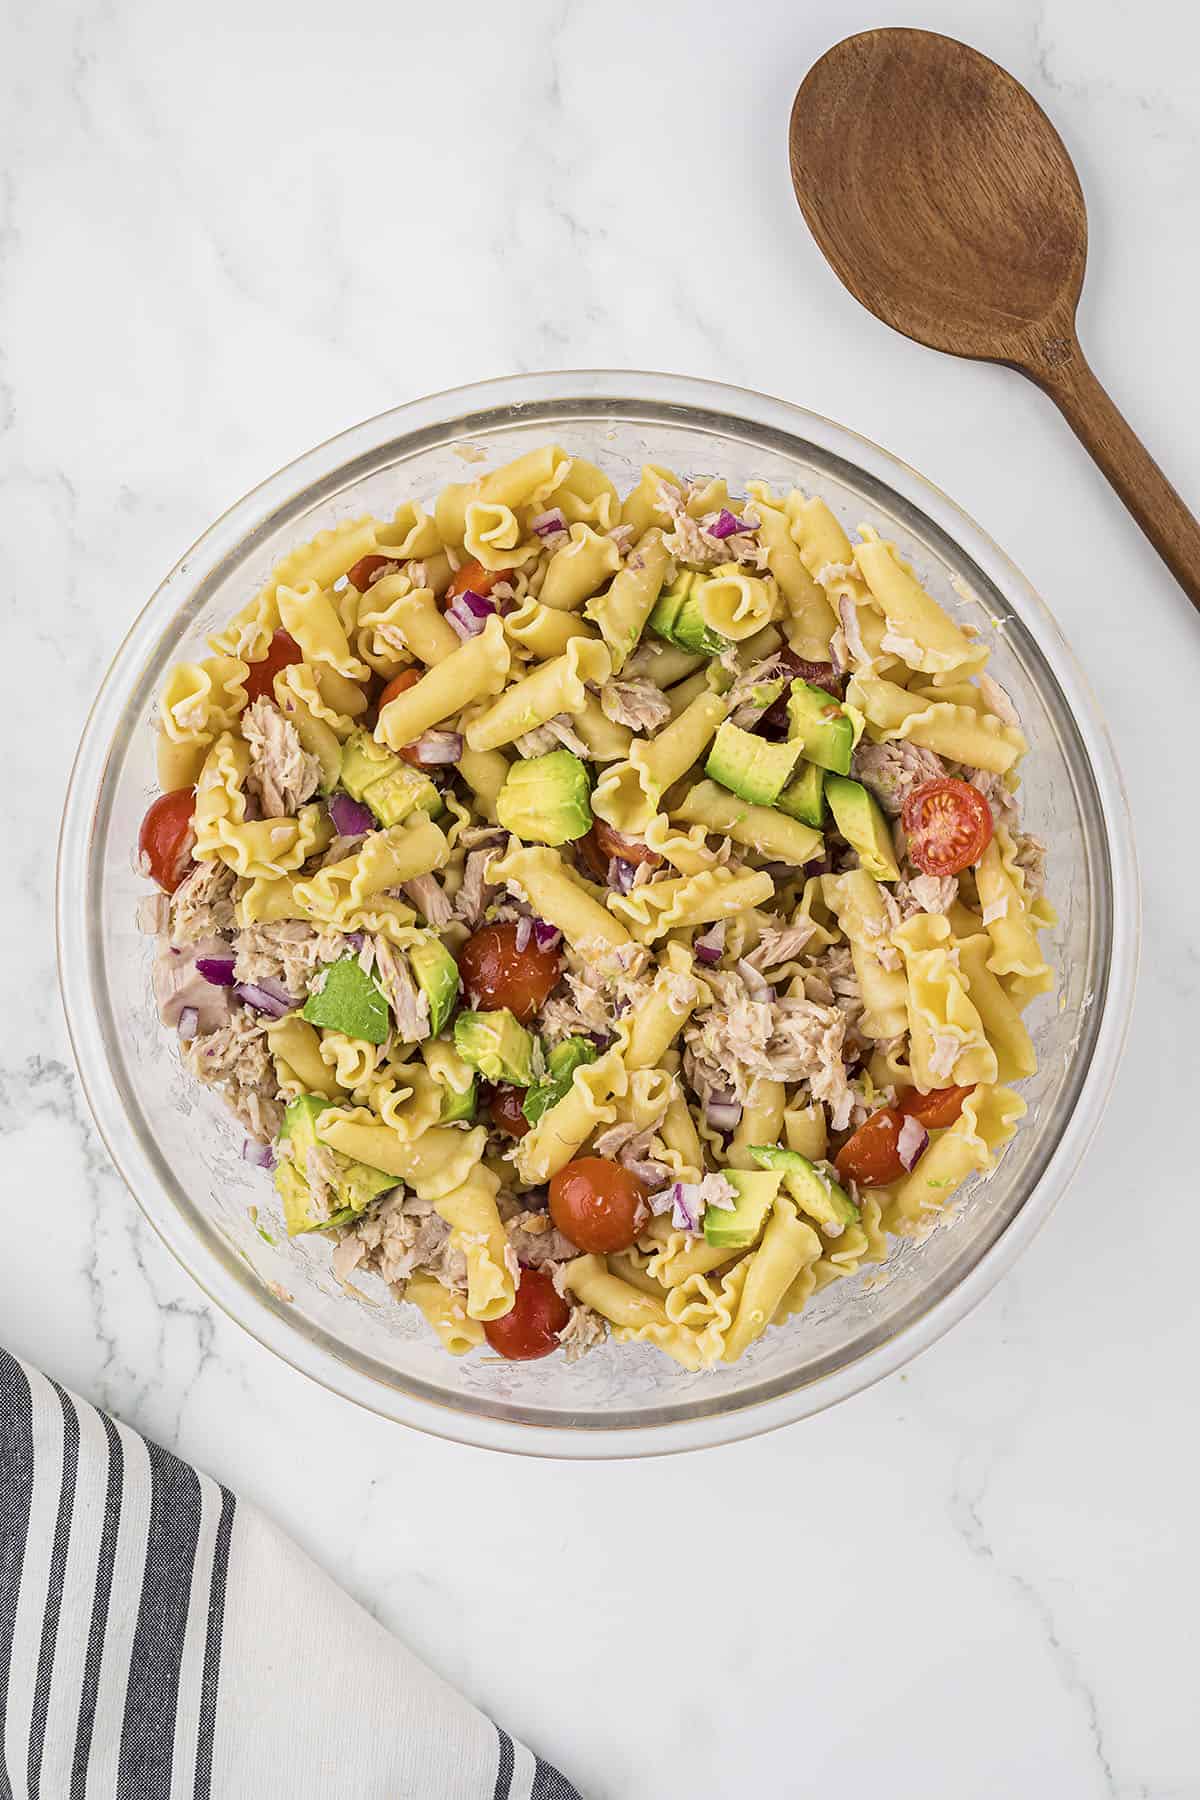 Tuna and vegetables in bowl of pasta.